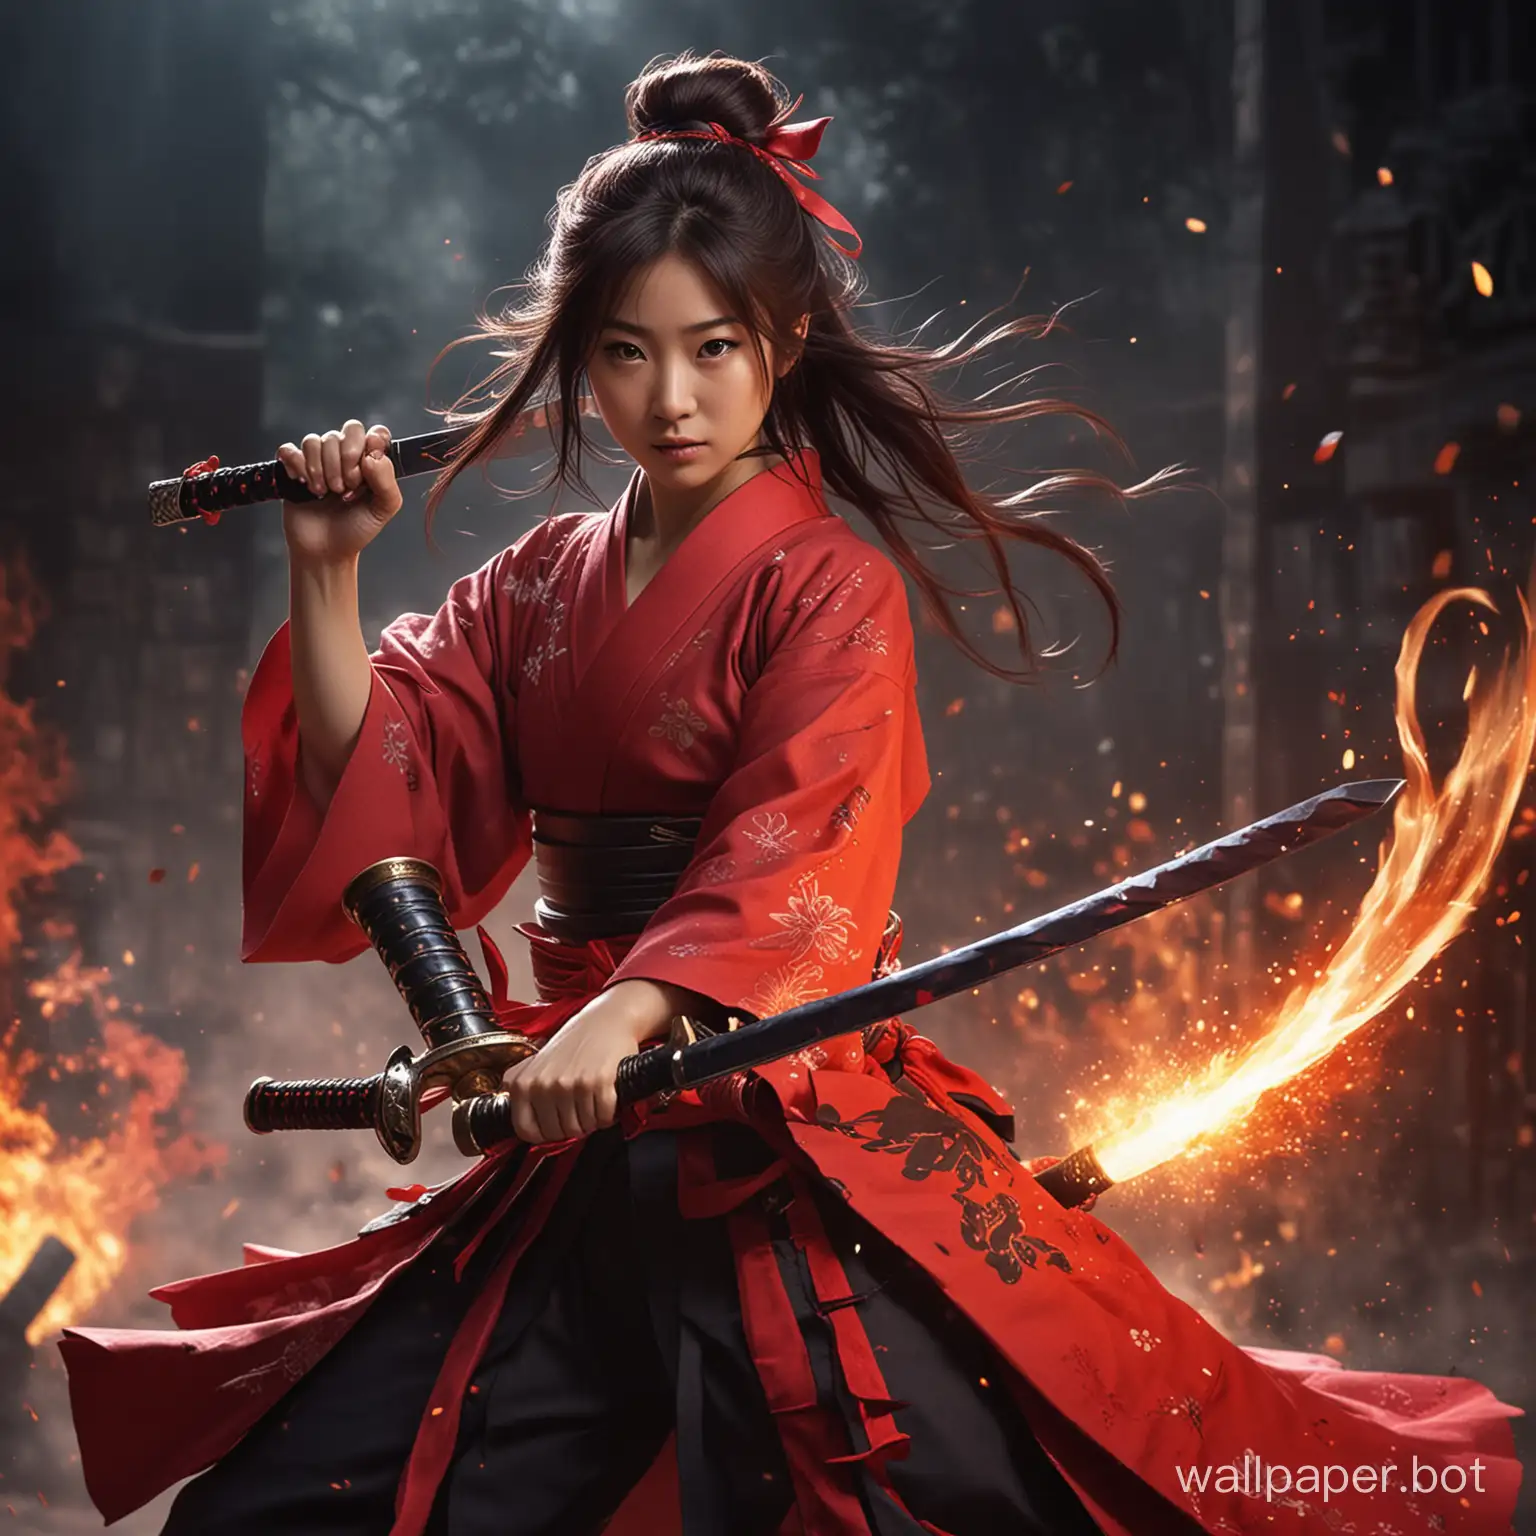 Kyoko Fukada, cute samurai girl, using red samurai amour, perform special move with sword, against dragon with fire.